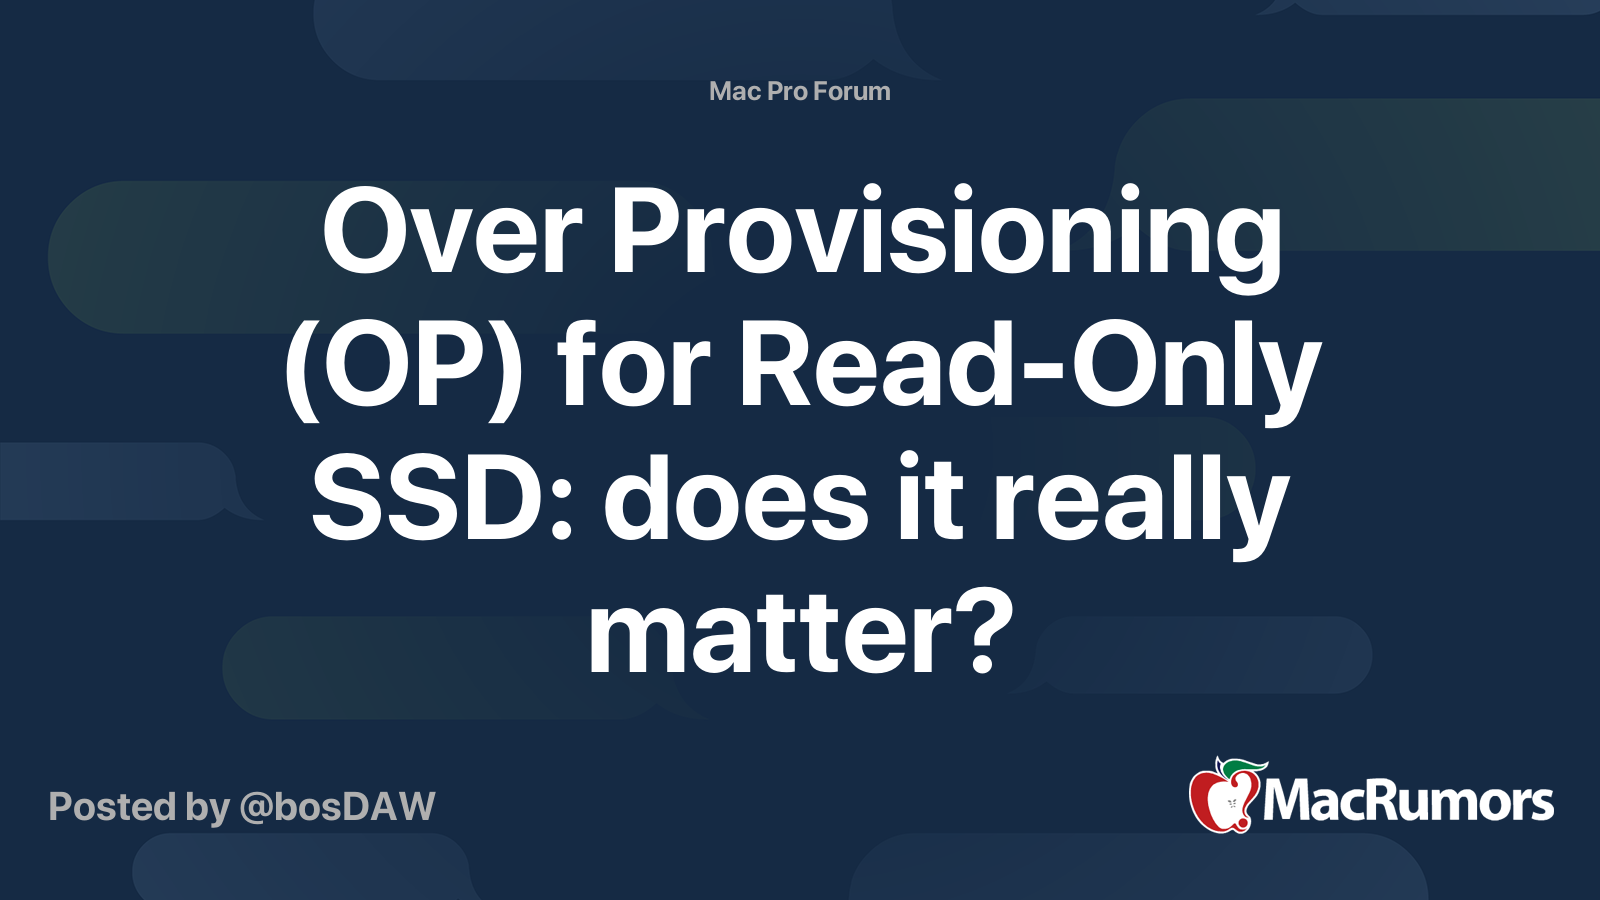 Over Provisioning (OP) for SSD: does matter? MacRumors Forums